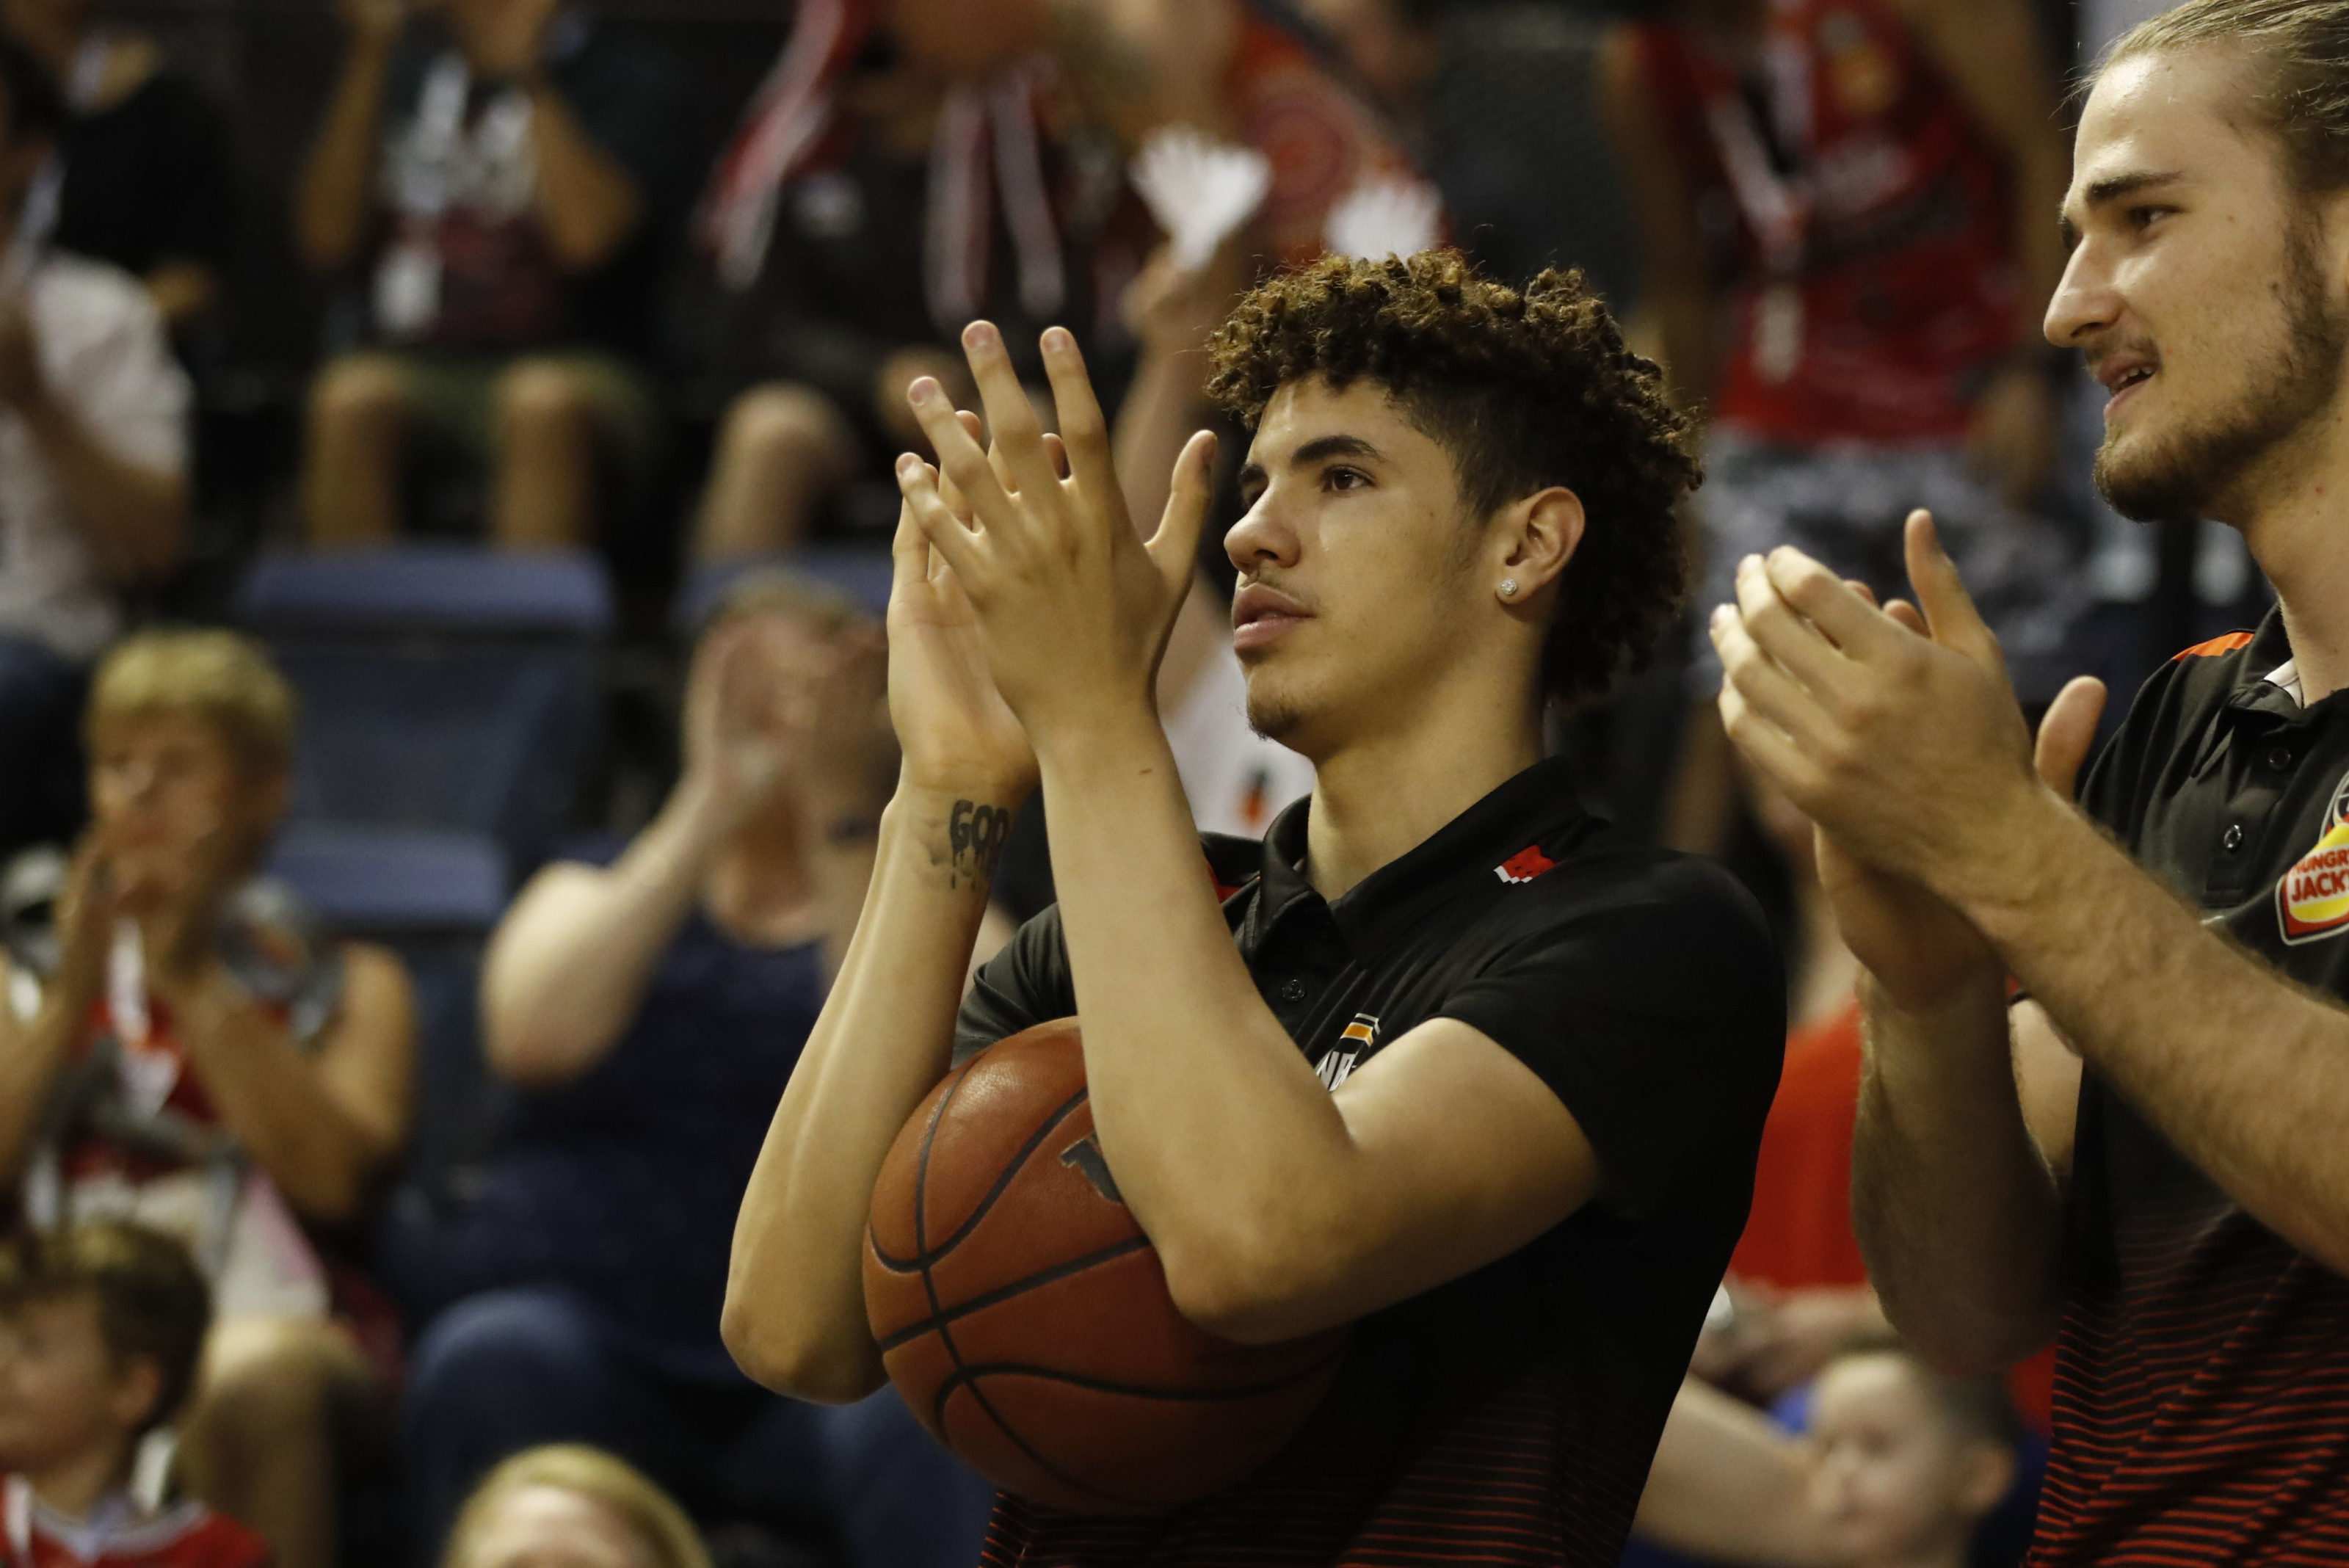 2020 NBA Draft: Getting to Know LaMelo Ball